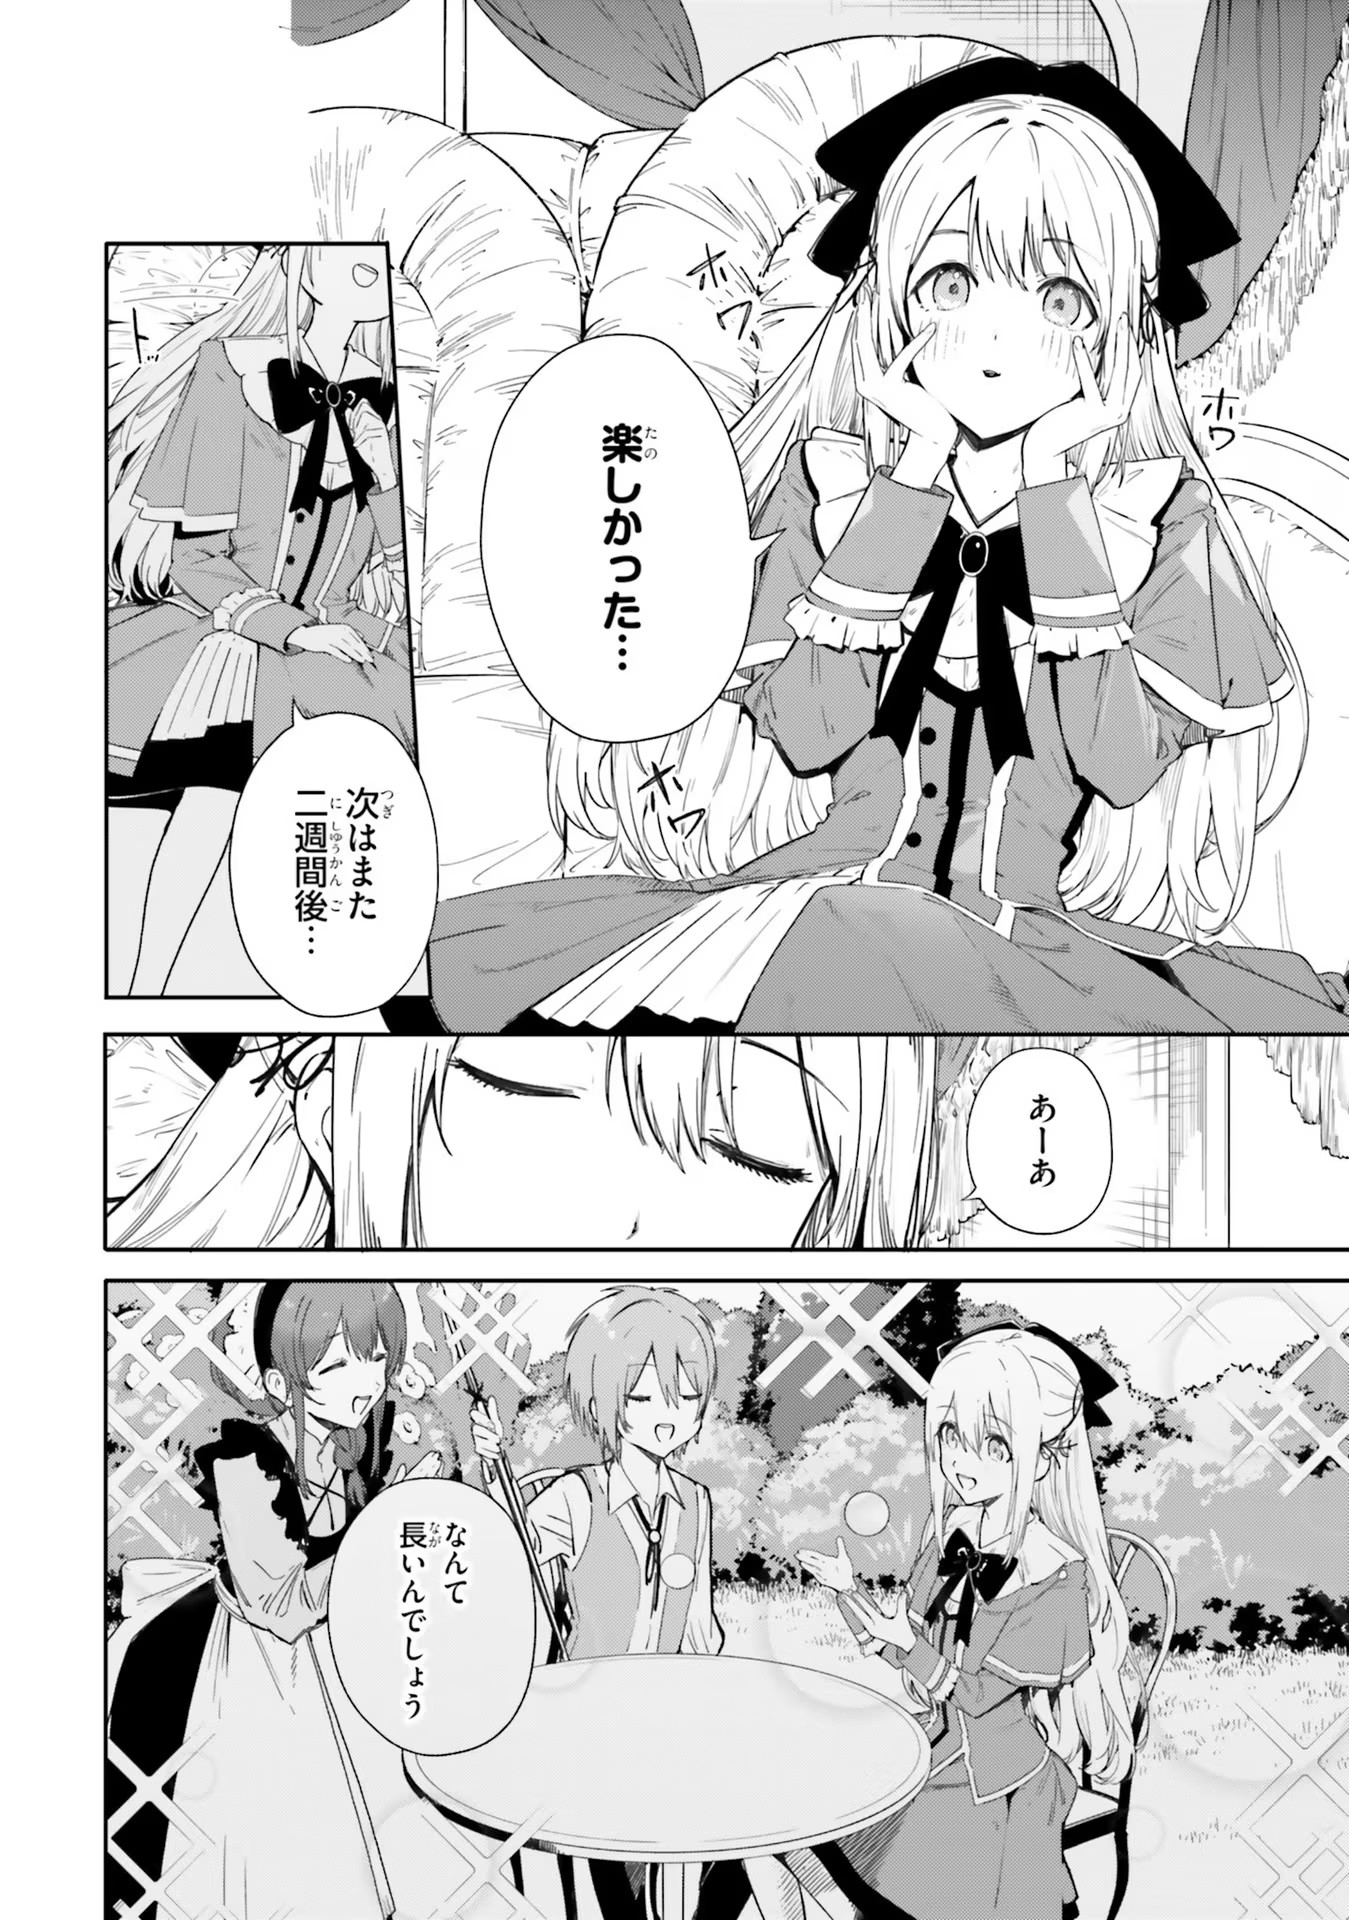 Kunon the Sorcerer Can See Kunon the Sorcerer Can See Through 魔術師クノンは見えている 第2話 - Page 14